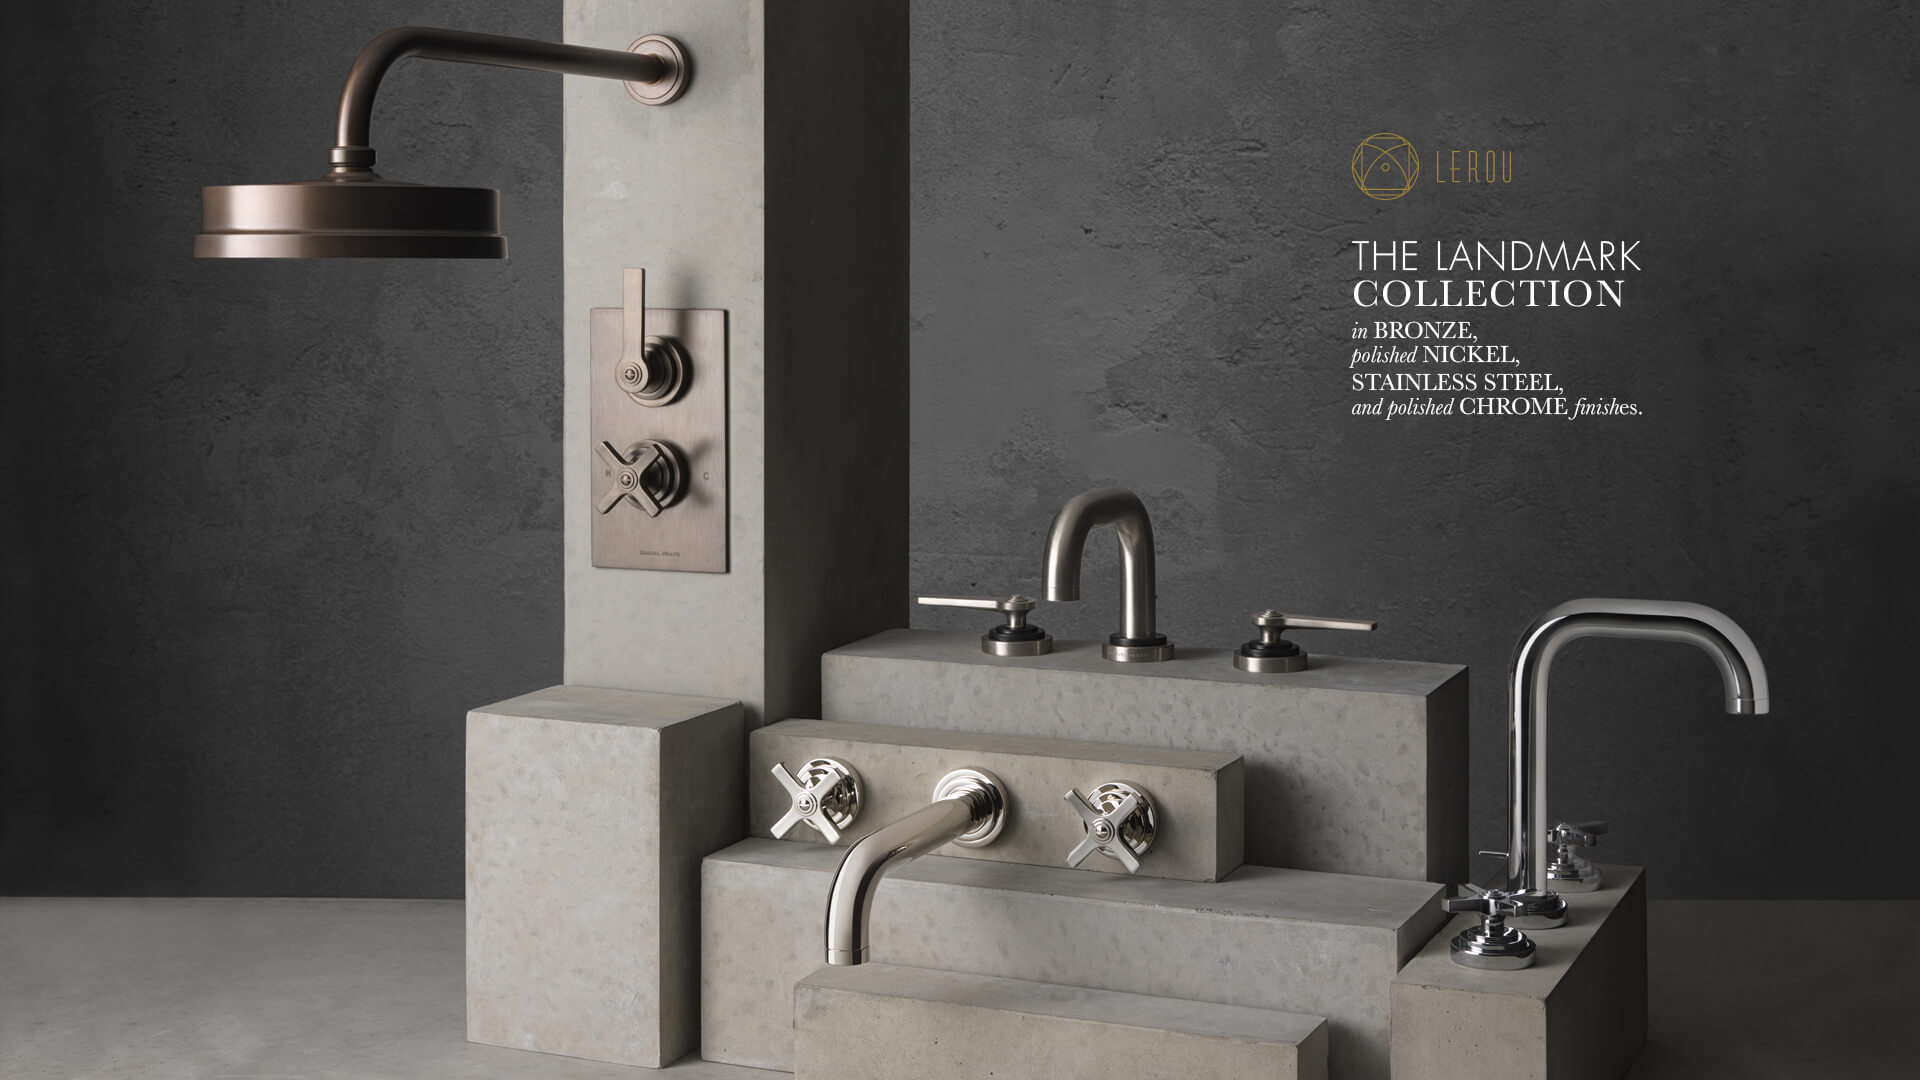 Lerou Landmark Collection: Contemporary, Bold and Urban Style.